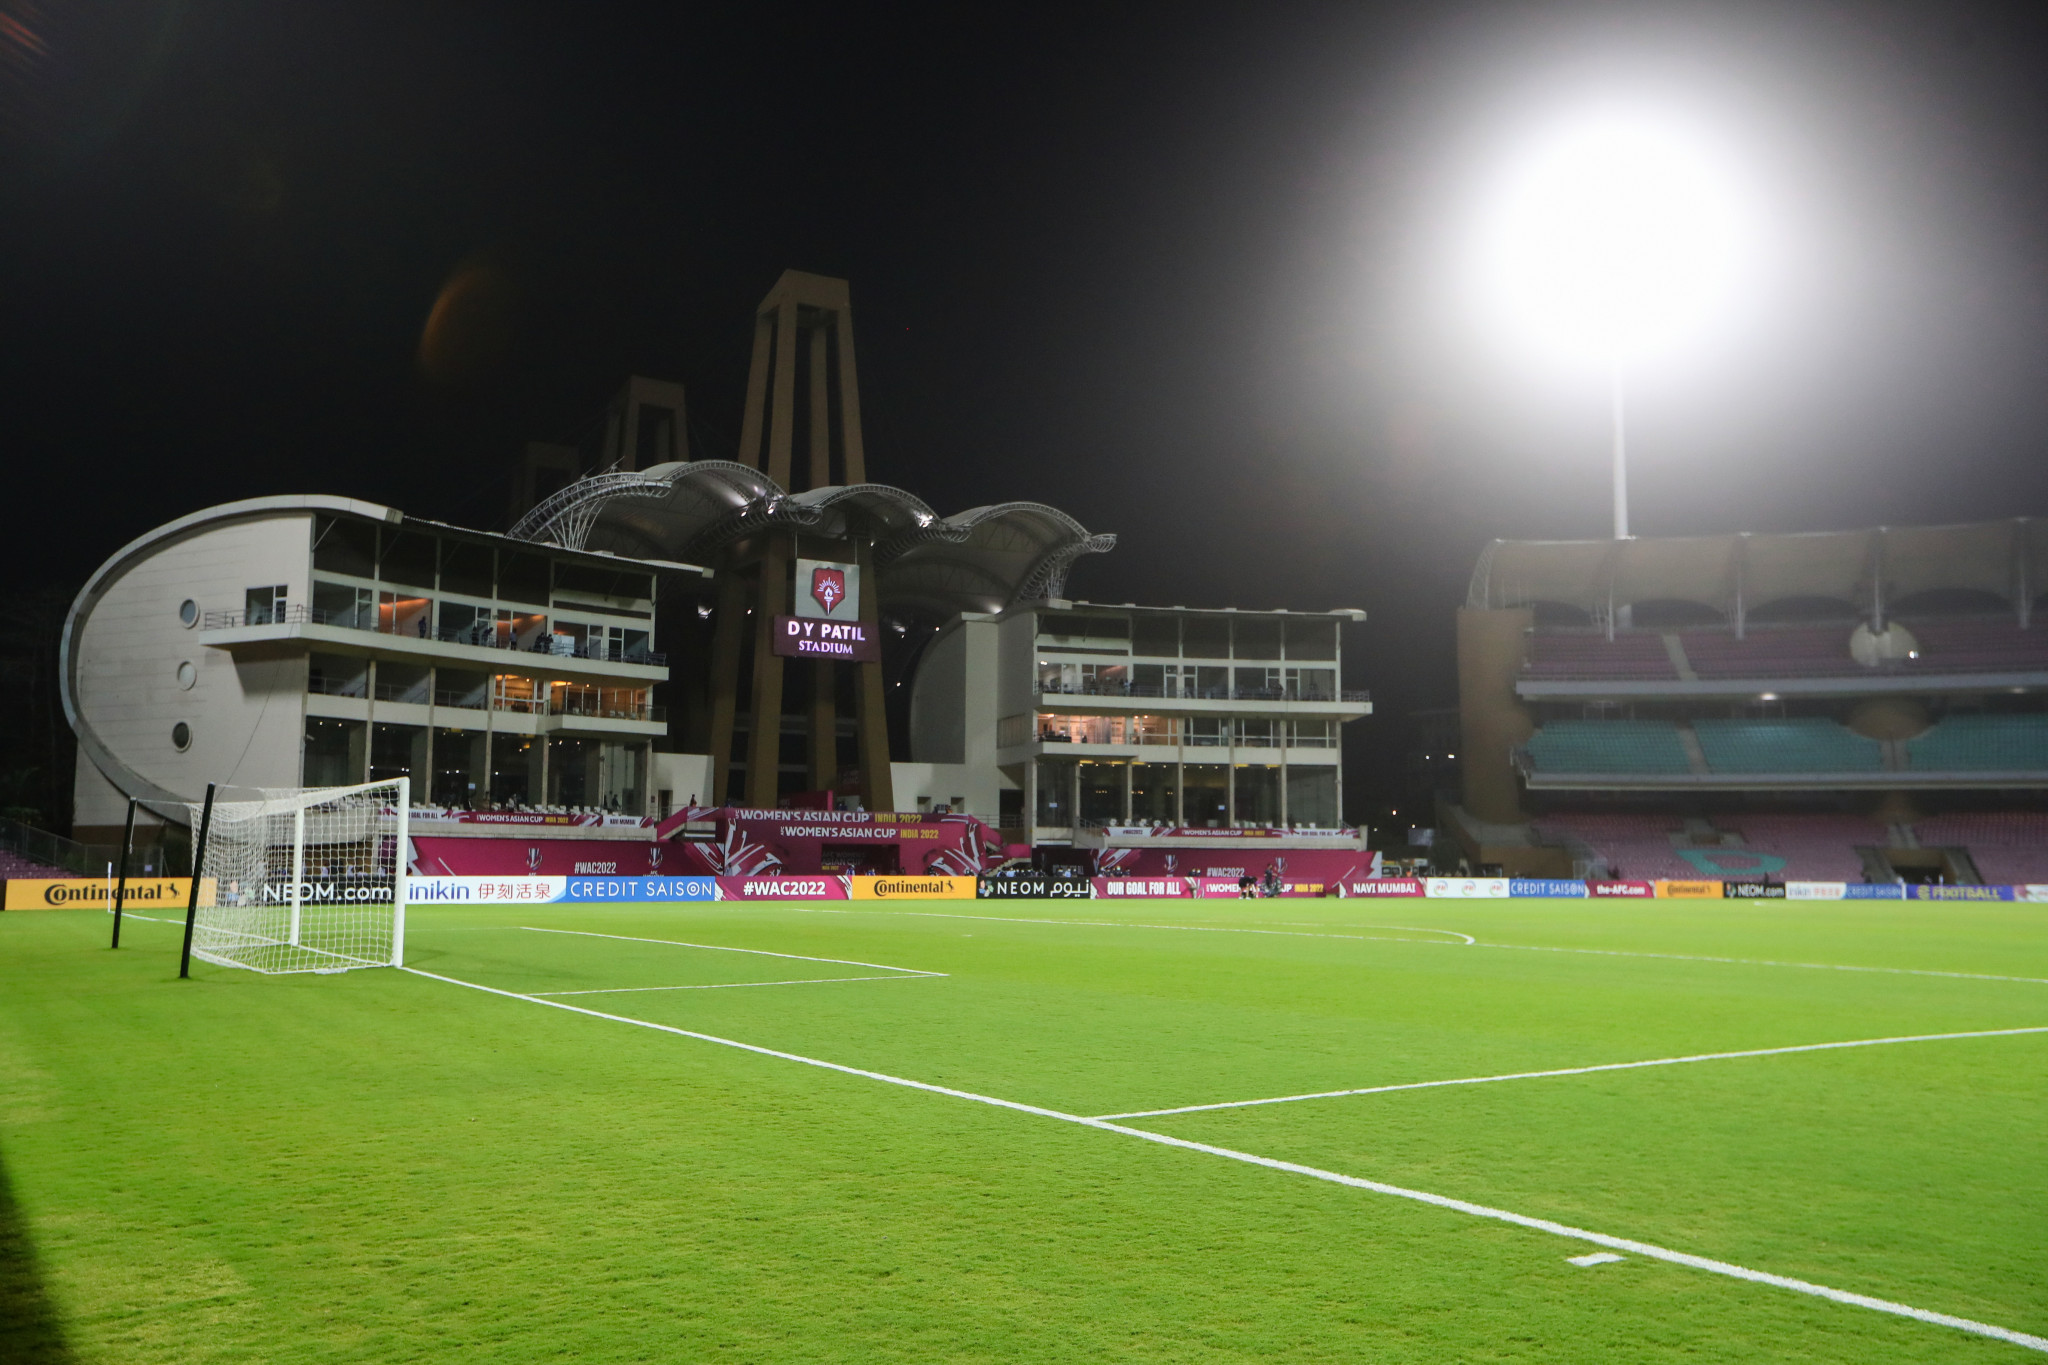 Navi Mumbai in India hosted the 2022 AFC Women's Asian Cup ©Getty Images